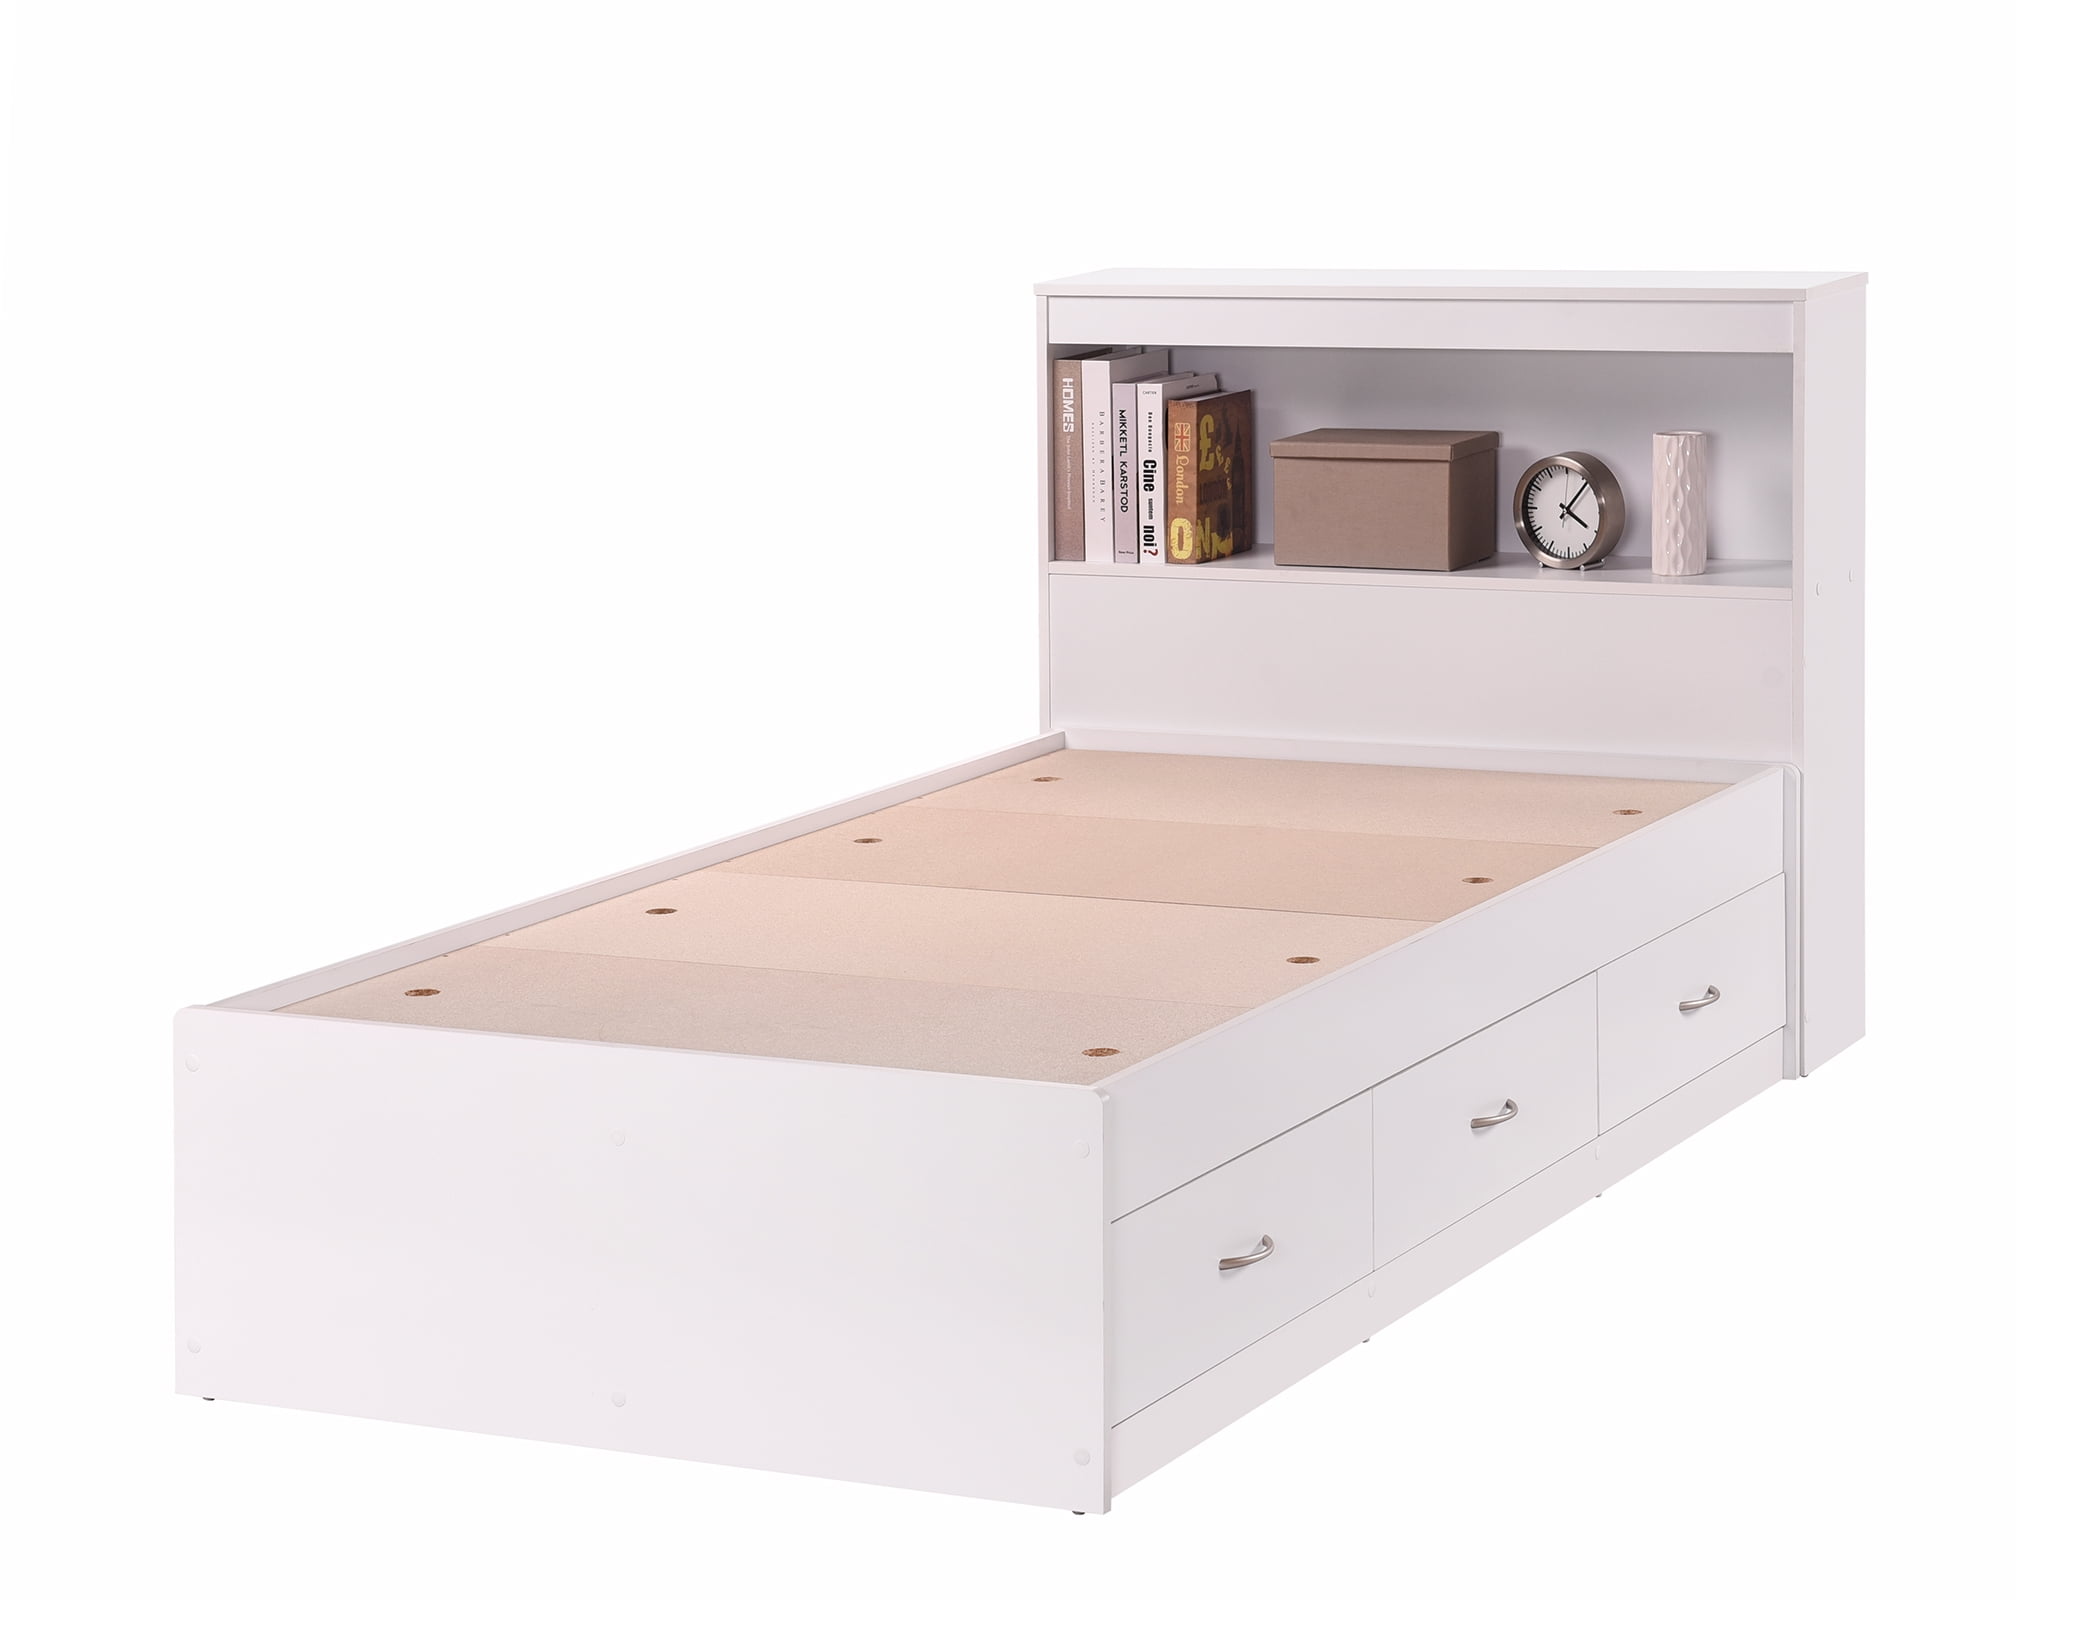 Mainstays Mates Storage Bed With, Twin Mates Bed With Bookcase Headboard